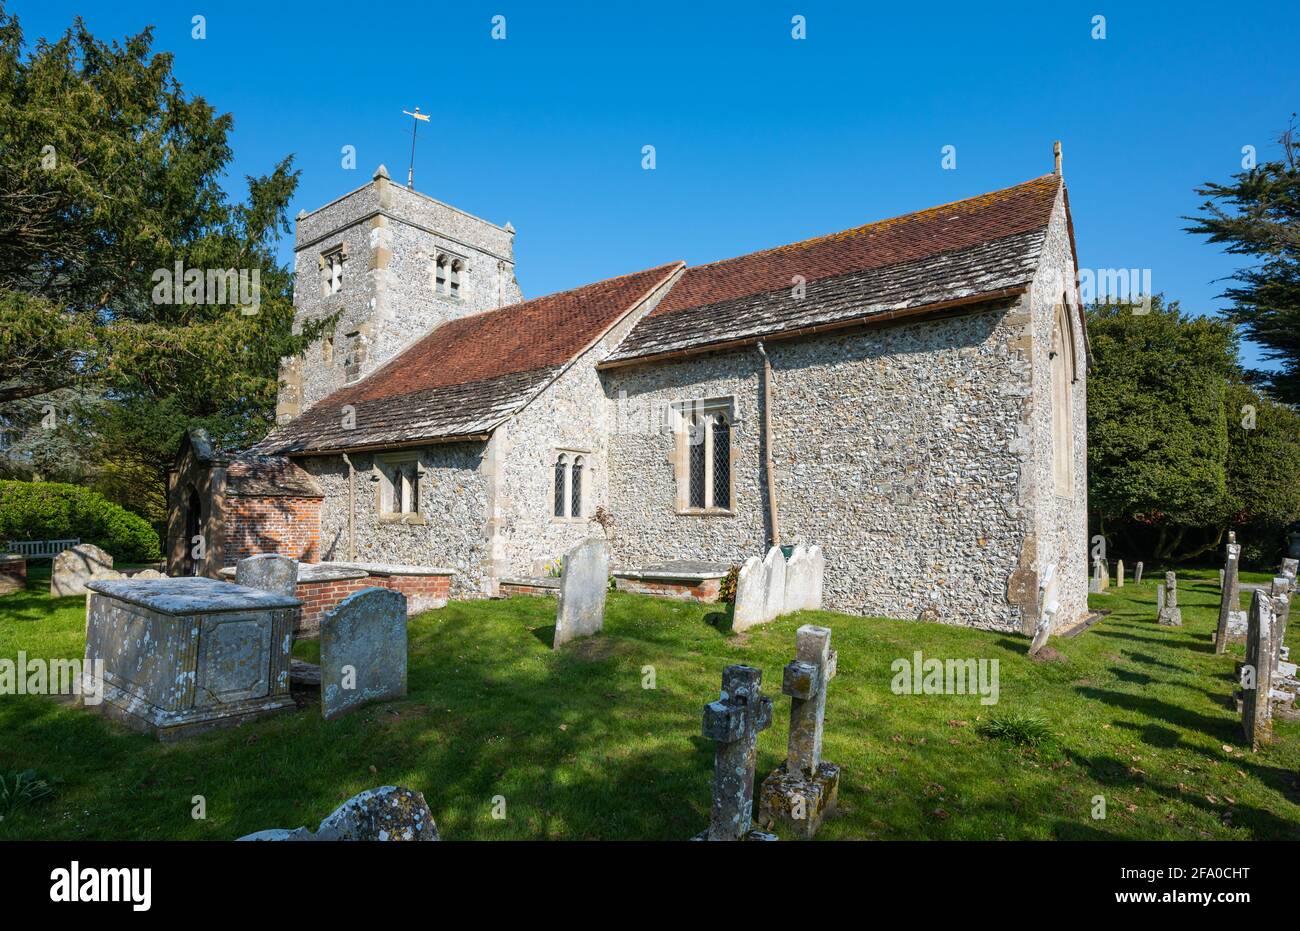 Grade 1 listed parish church of Saint Nicholas (St Nicholas Church), a historic chapel & cemetery in Poling, West Sussex, England, UK. Stock Photo